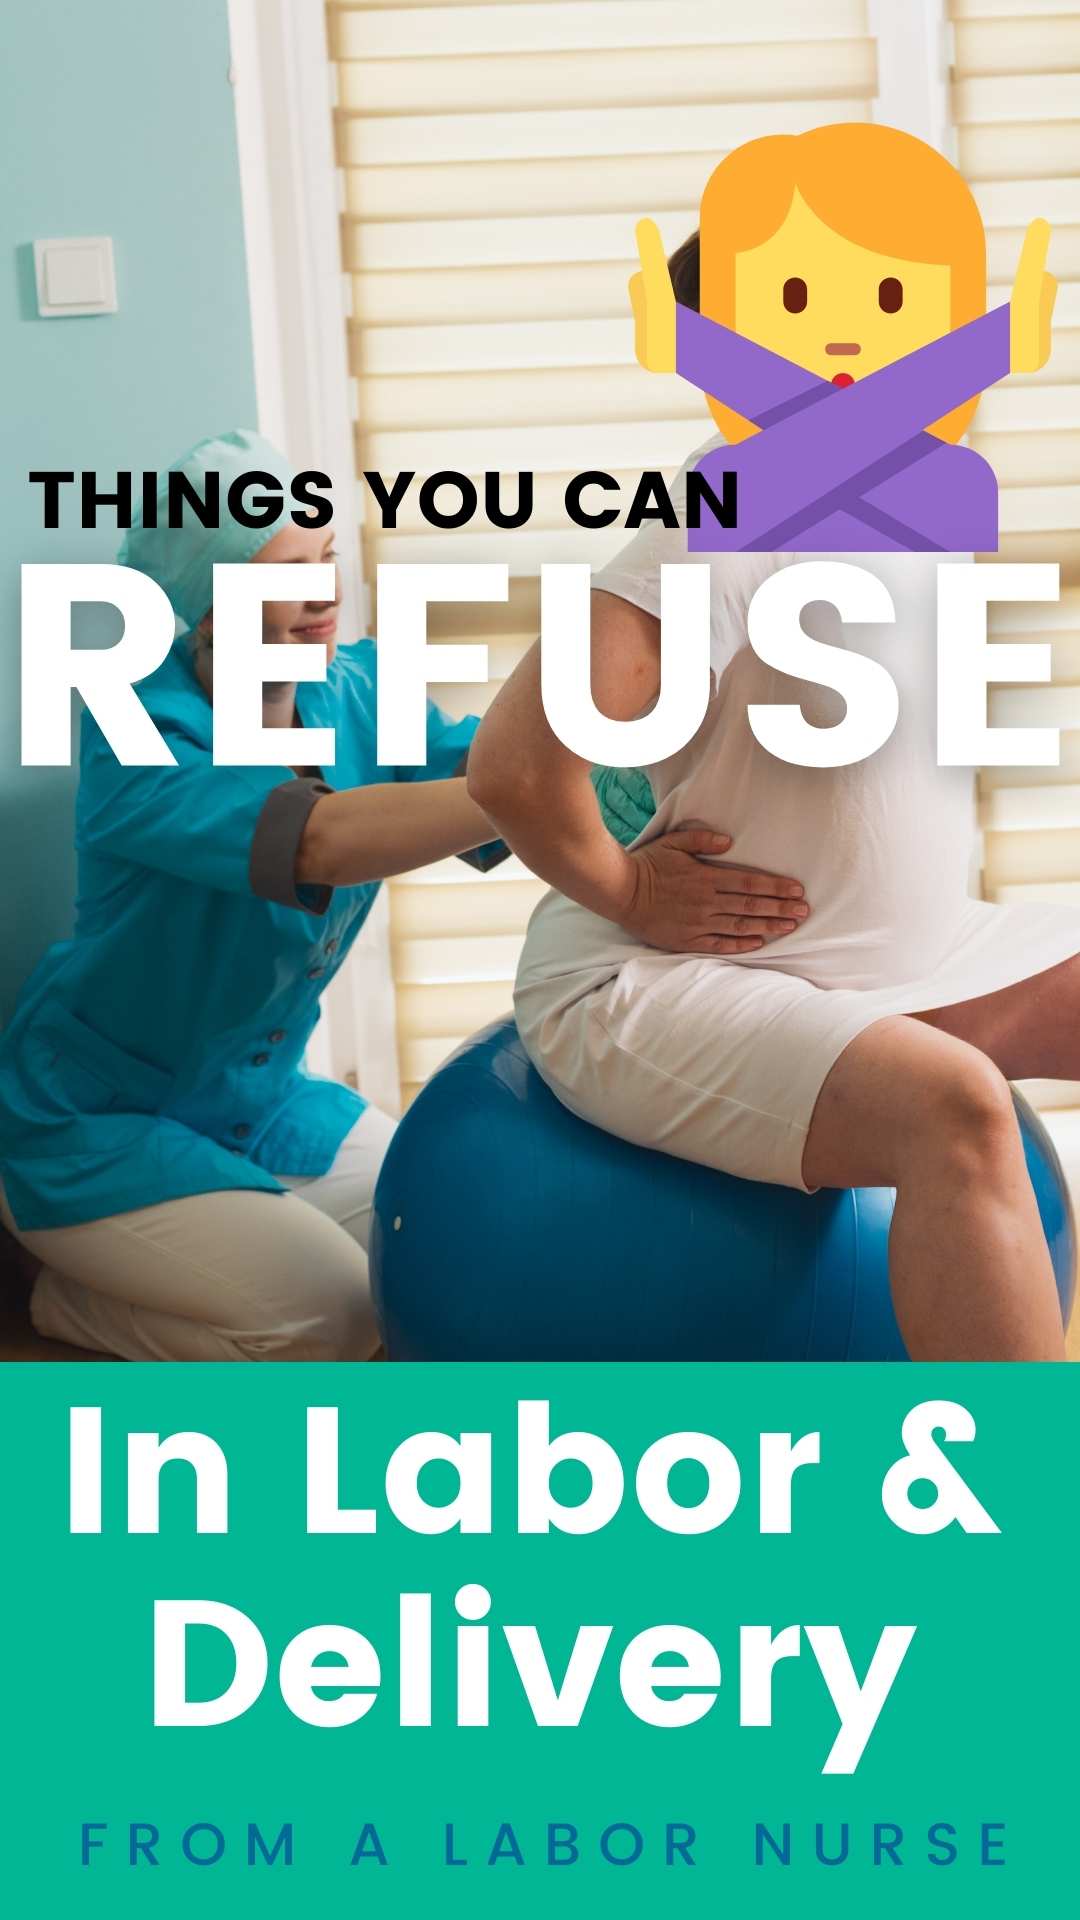 You may wonder if there are things you can refuse during labor. You might have preferences about what you want to do, but you don't want to feel like a jerk when you ask to do something different from what they normally do. Today I'm going to share some simple things that people often refuse in labor so you can learn how that type of process goes, and can make choices for yourself and communicate them respectfully with your healthcare team. I hope you find this article very helpful for your labor!